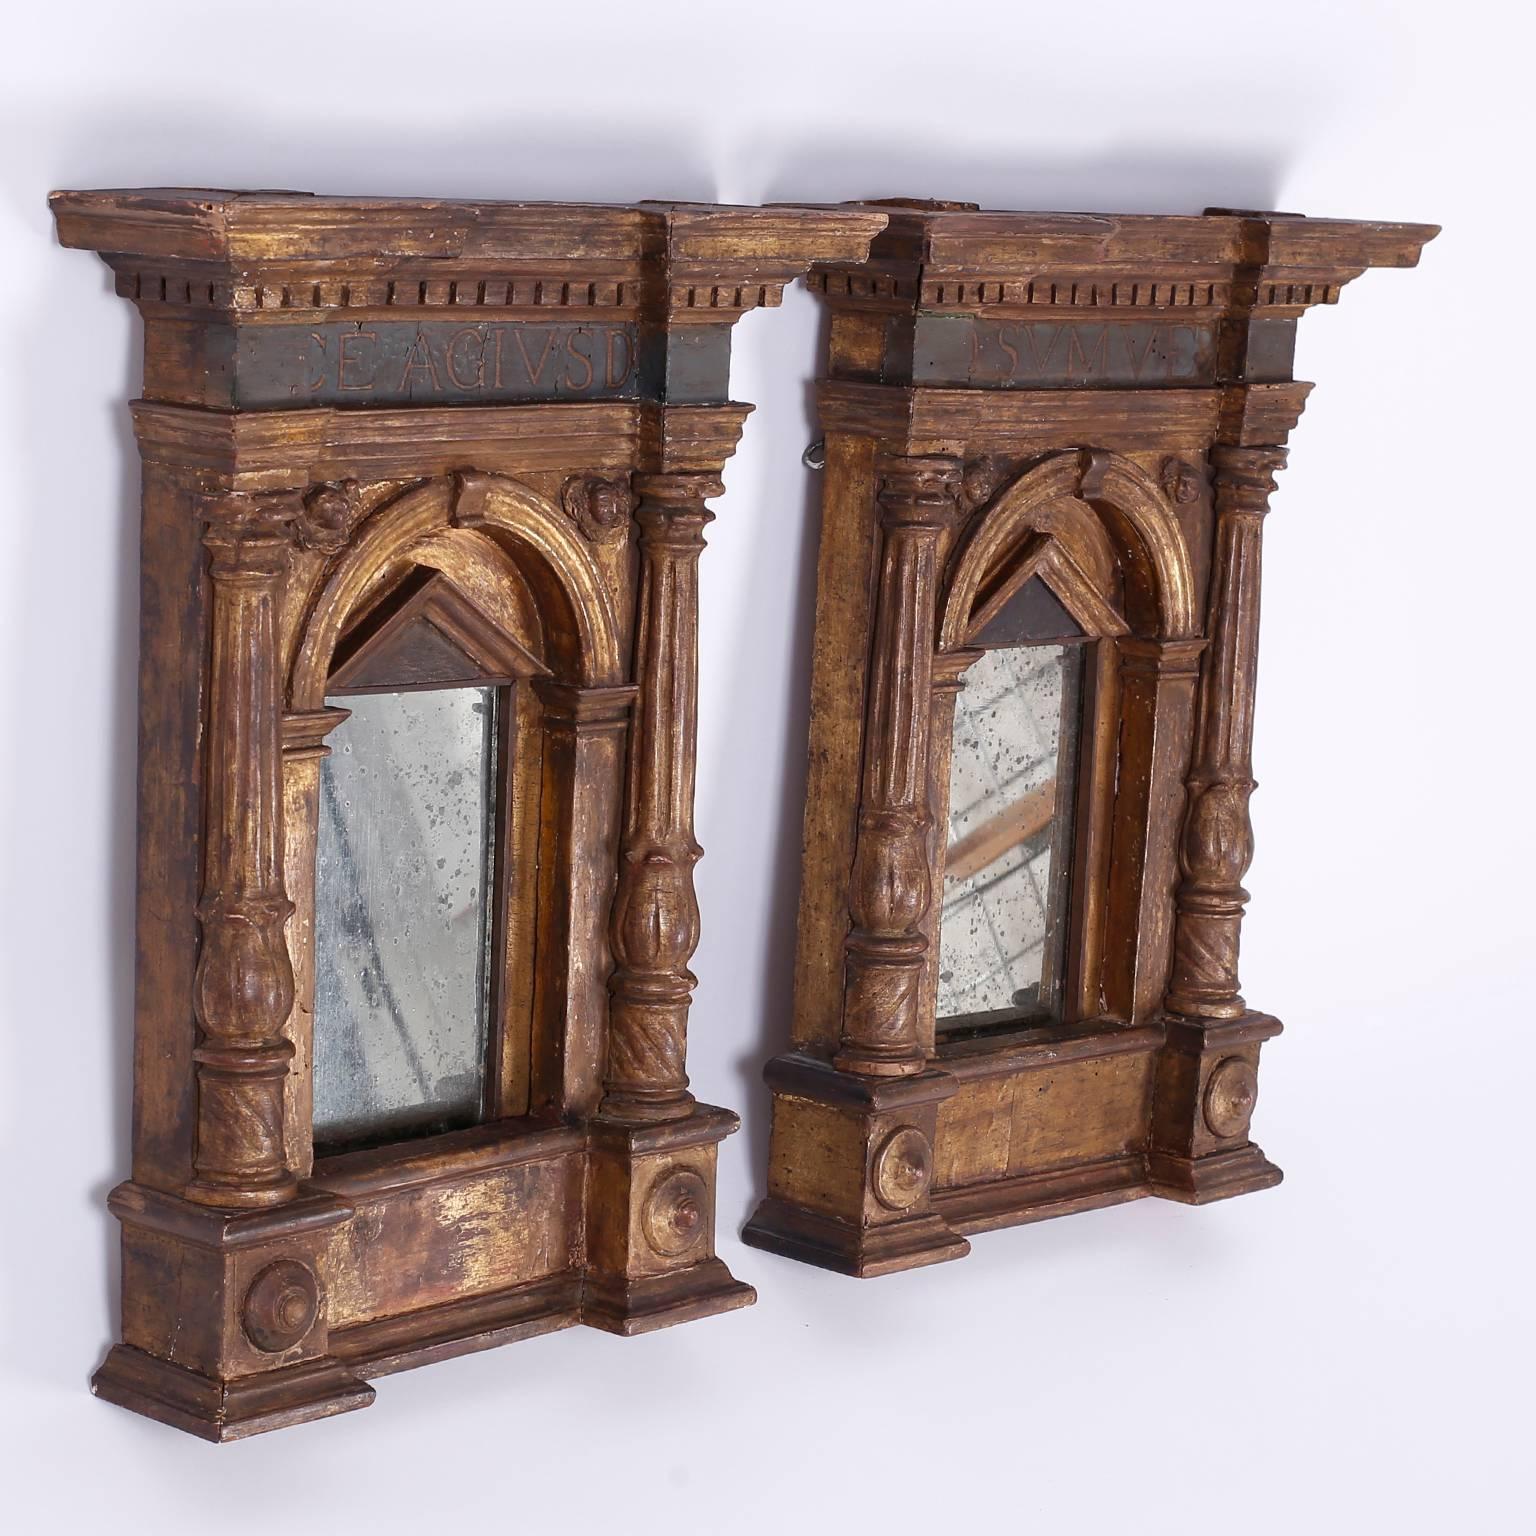 Pair of historically relevant mirrors. Transporting Renaissance mirror frames carved from walnut and retaining their 17th century gilt gesso. Featuring the unrestrained influence of Classic Greek architecture and decorated with Latin descriptions.